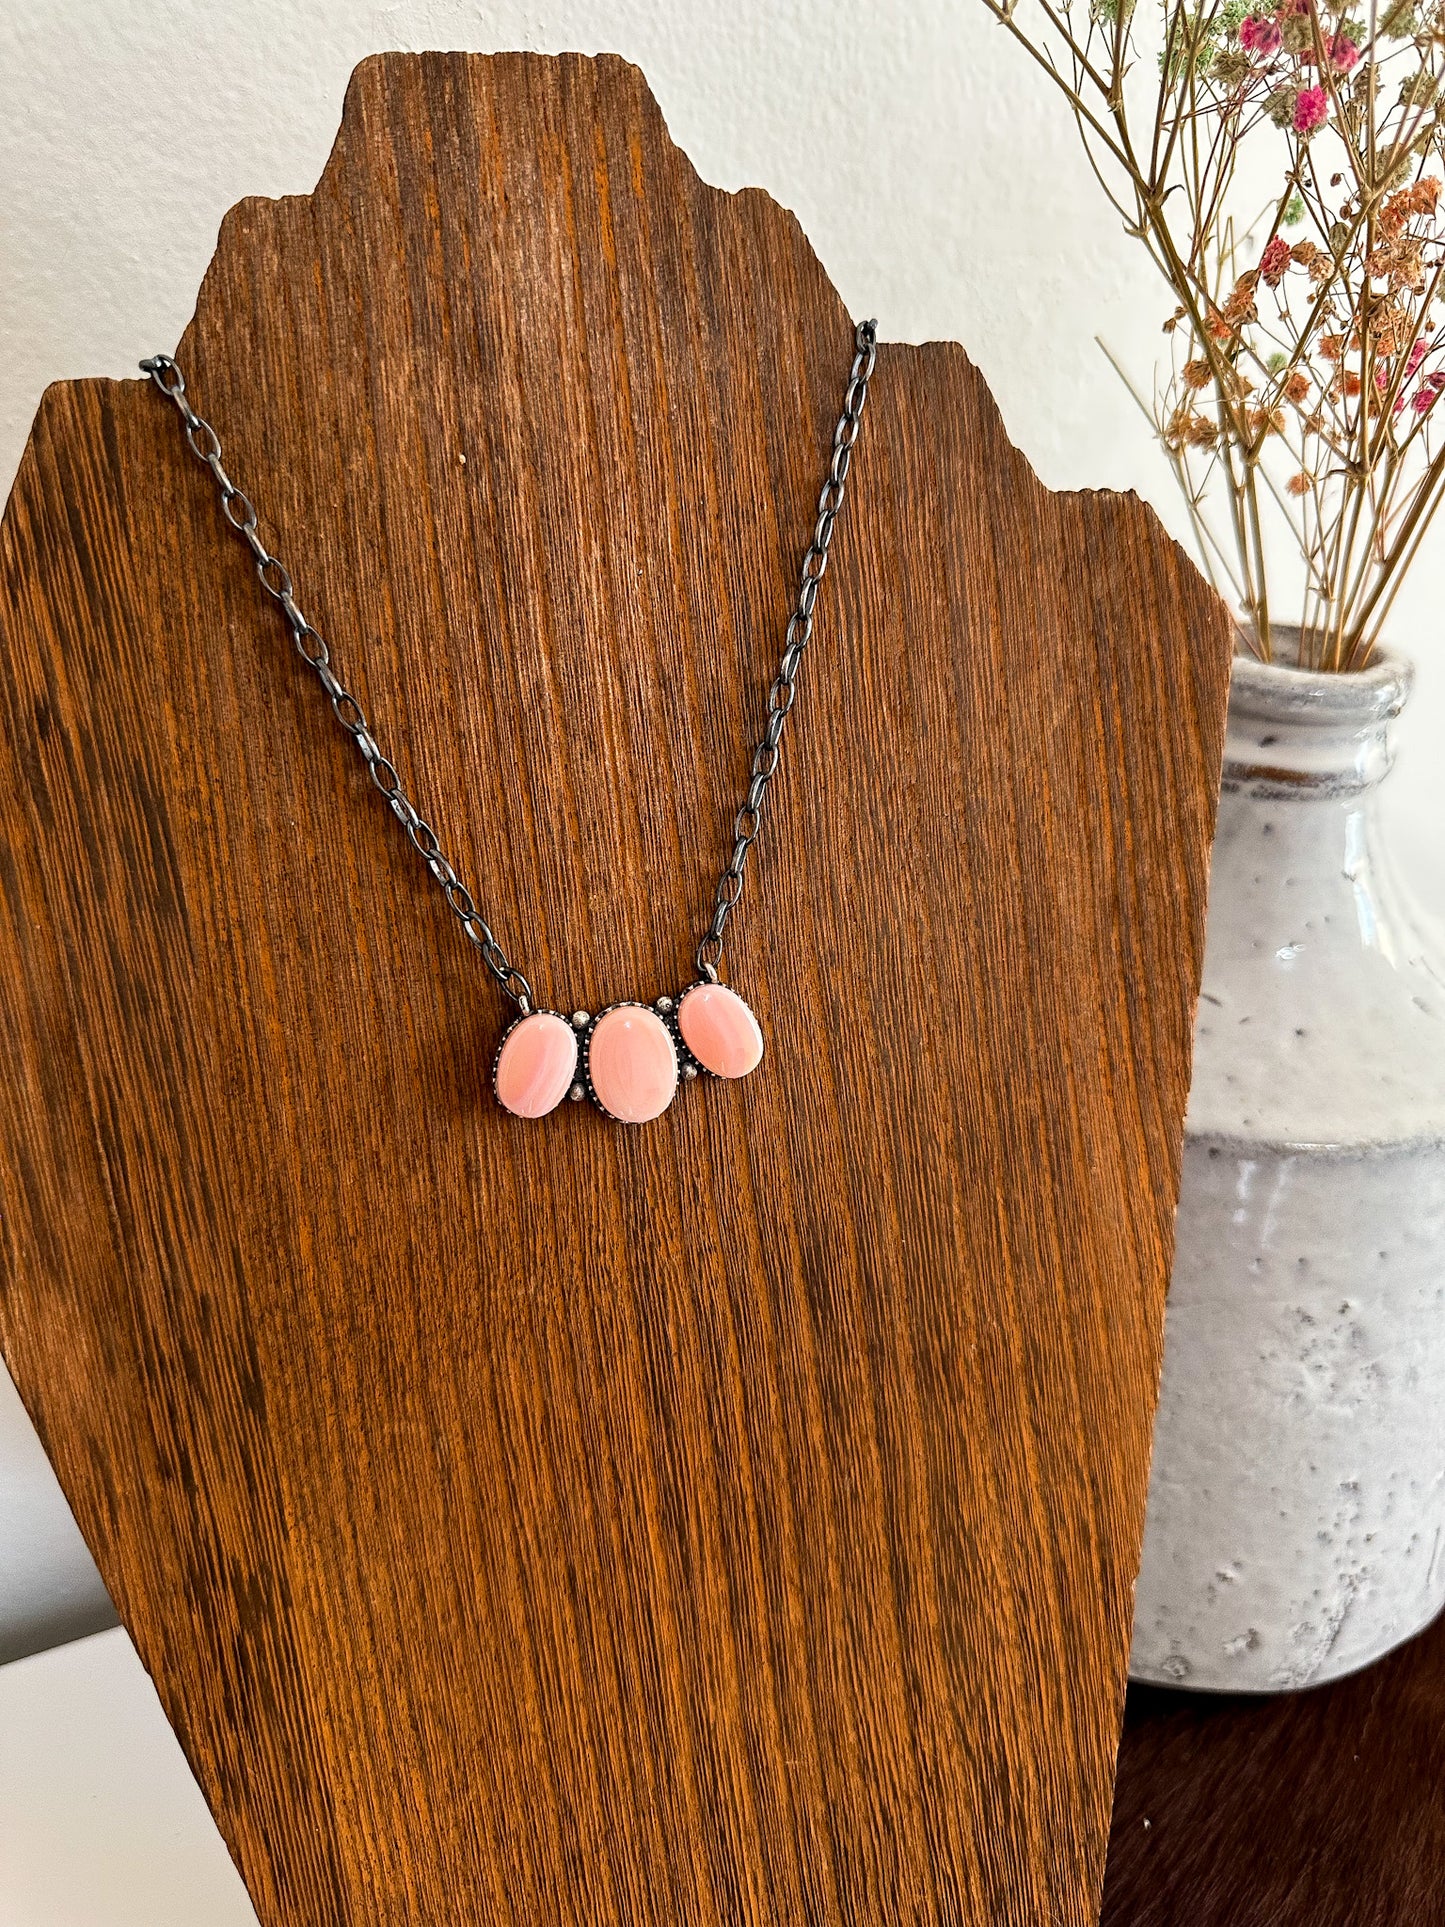 Maybell Necklace - Pink Conch Shell Stone